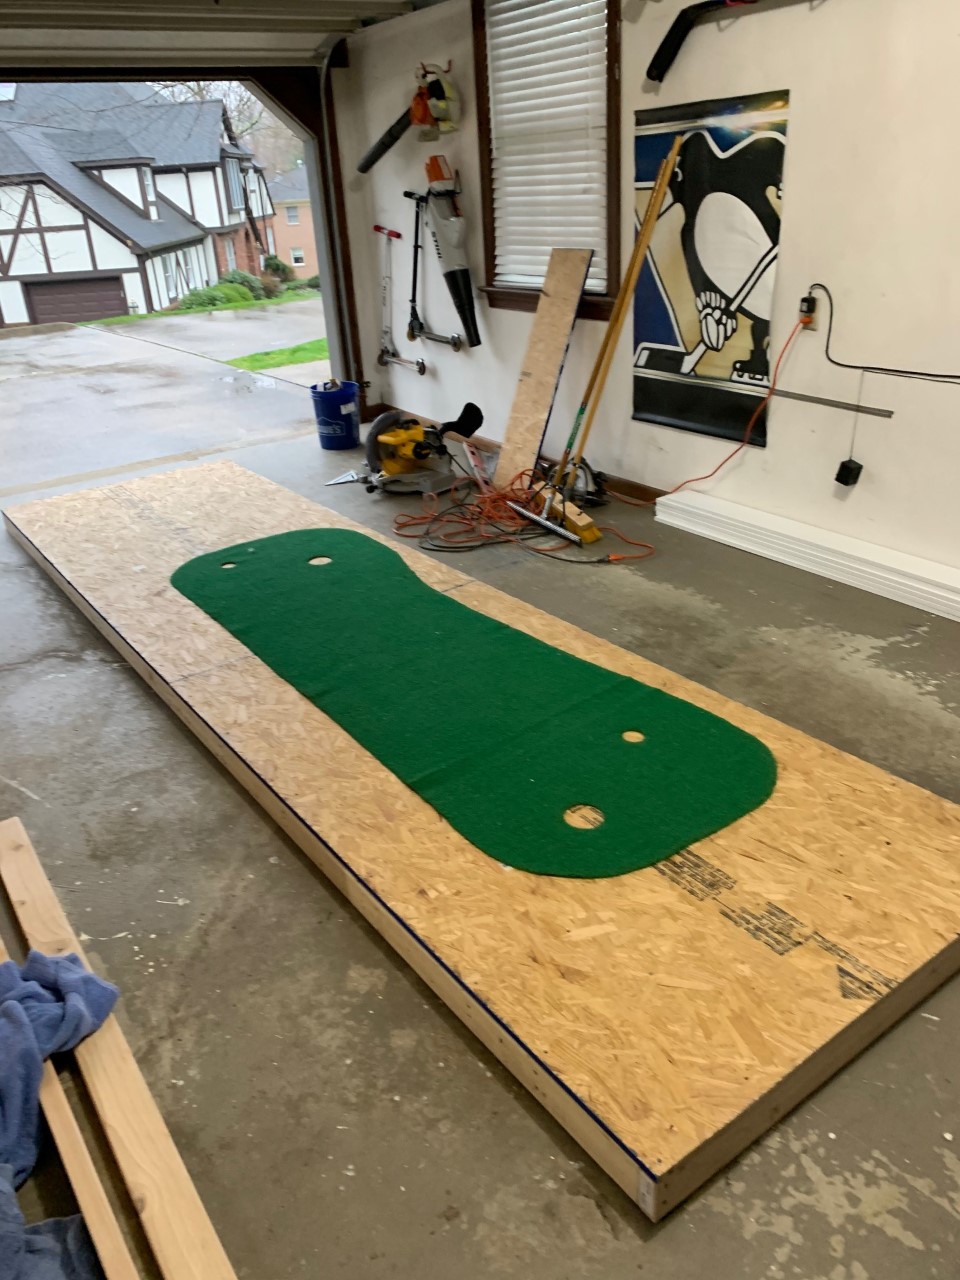 Particle board or Plywood works for DIY putting green. 1/2" or 3/4" is ideal.